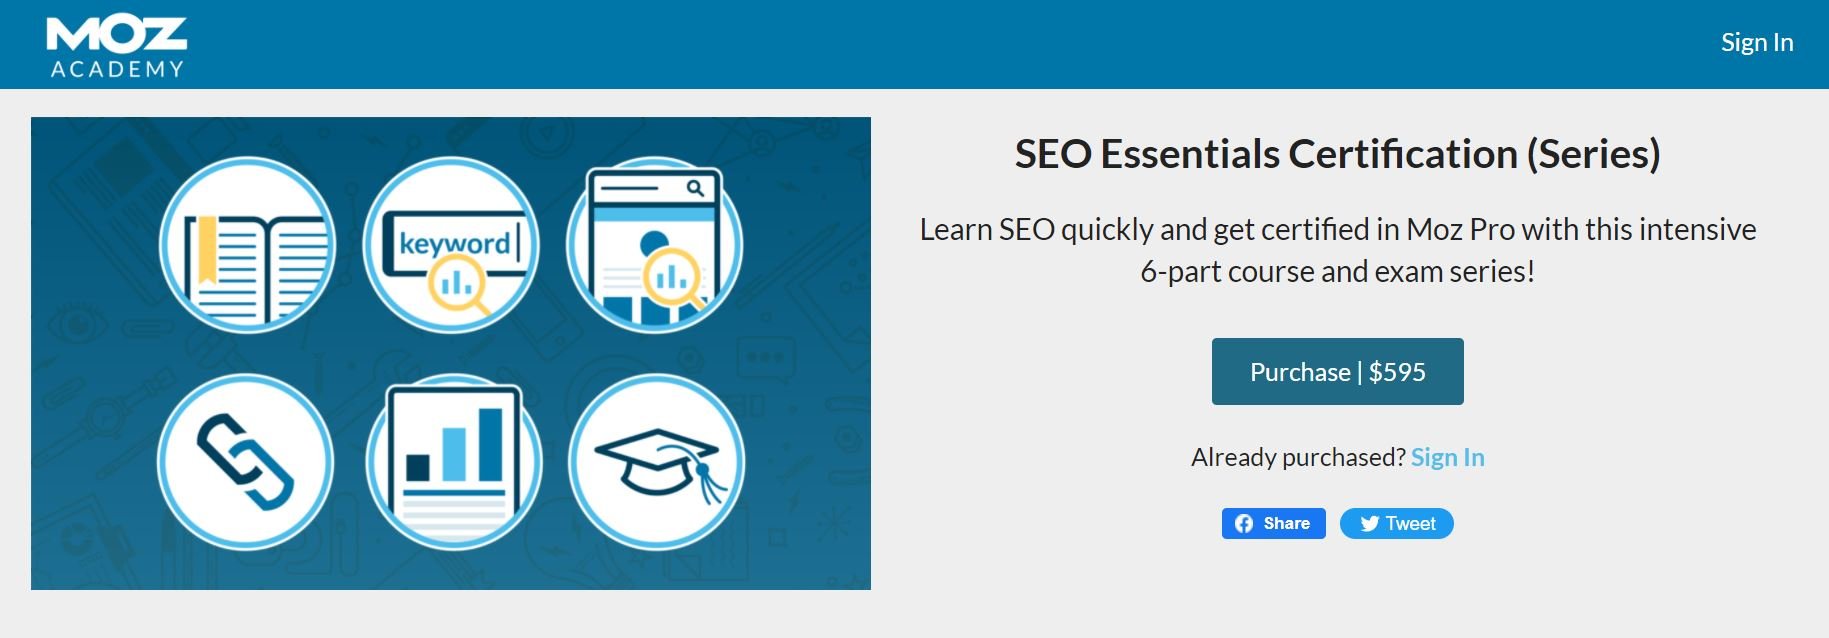 The SEO Essentials Certification course by Moz includes keyword research training. 